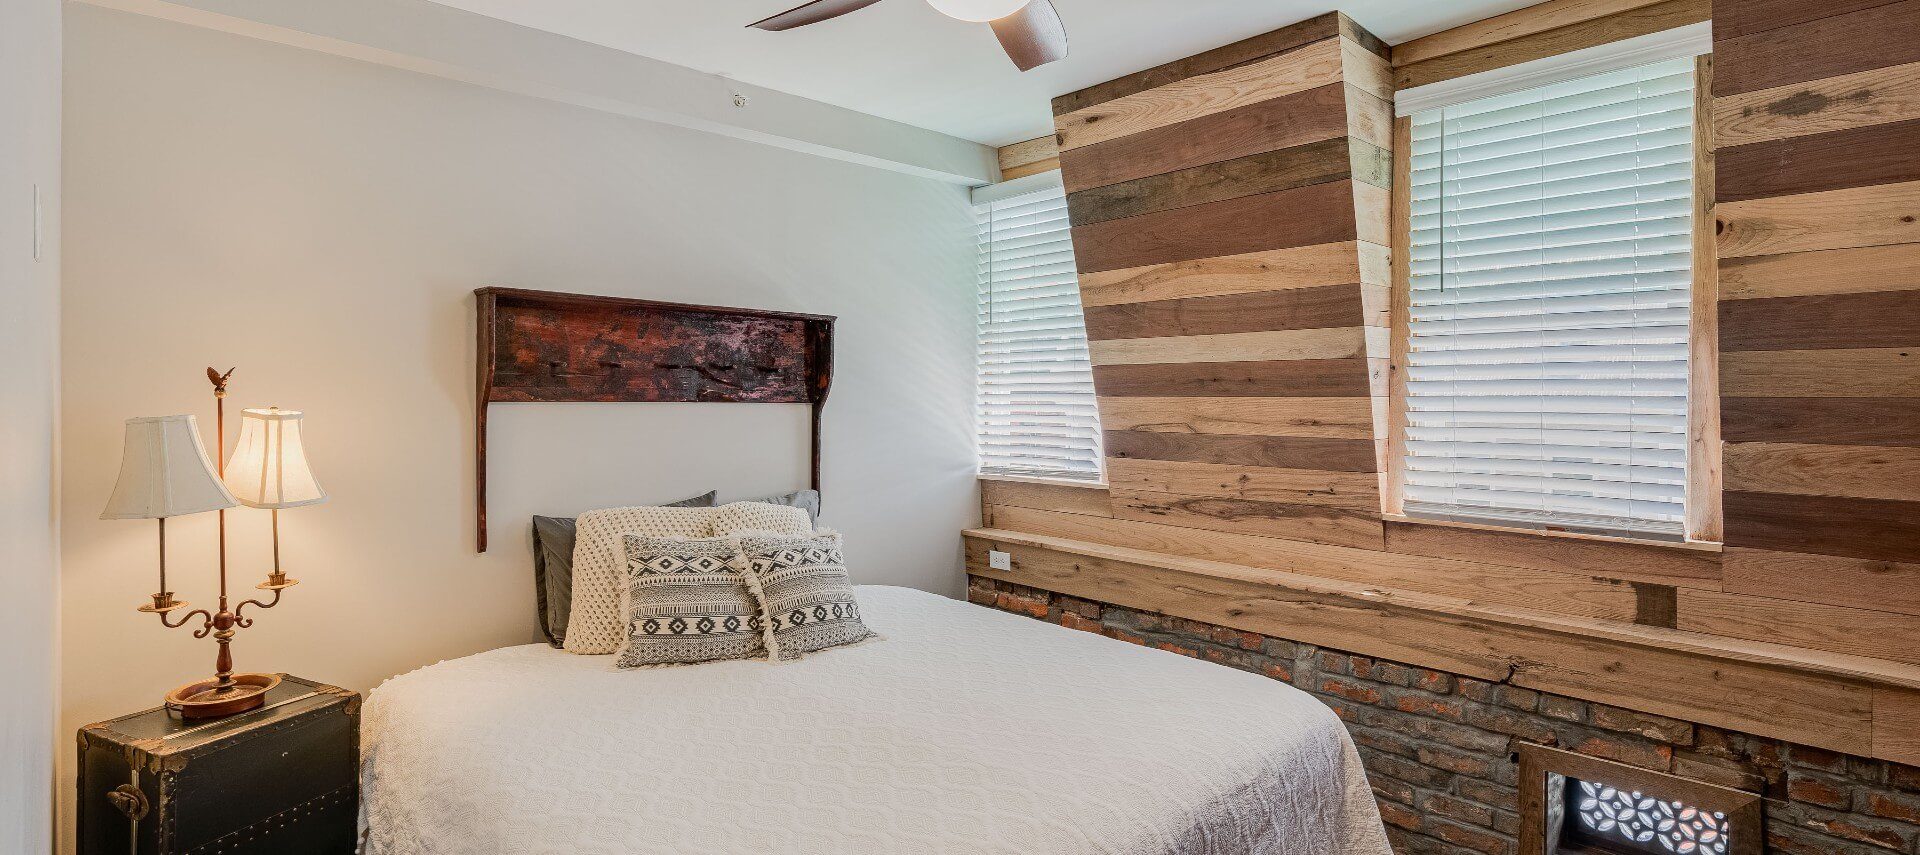 Bedroom with king bed, unique angled walls with rustic wood paneling and side table with lamp